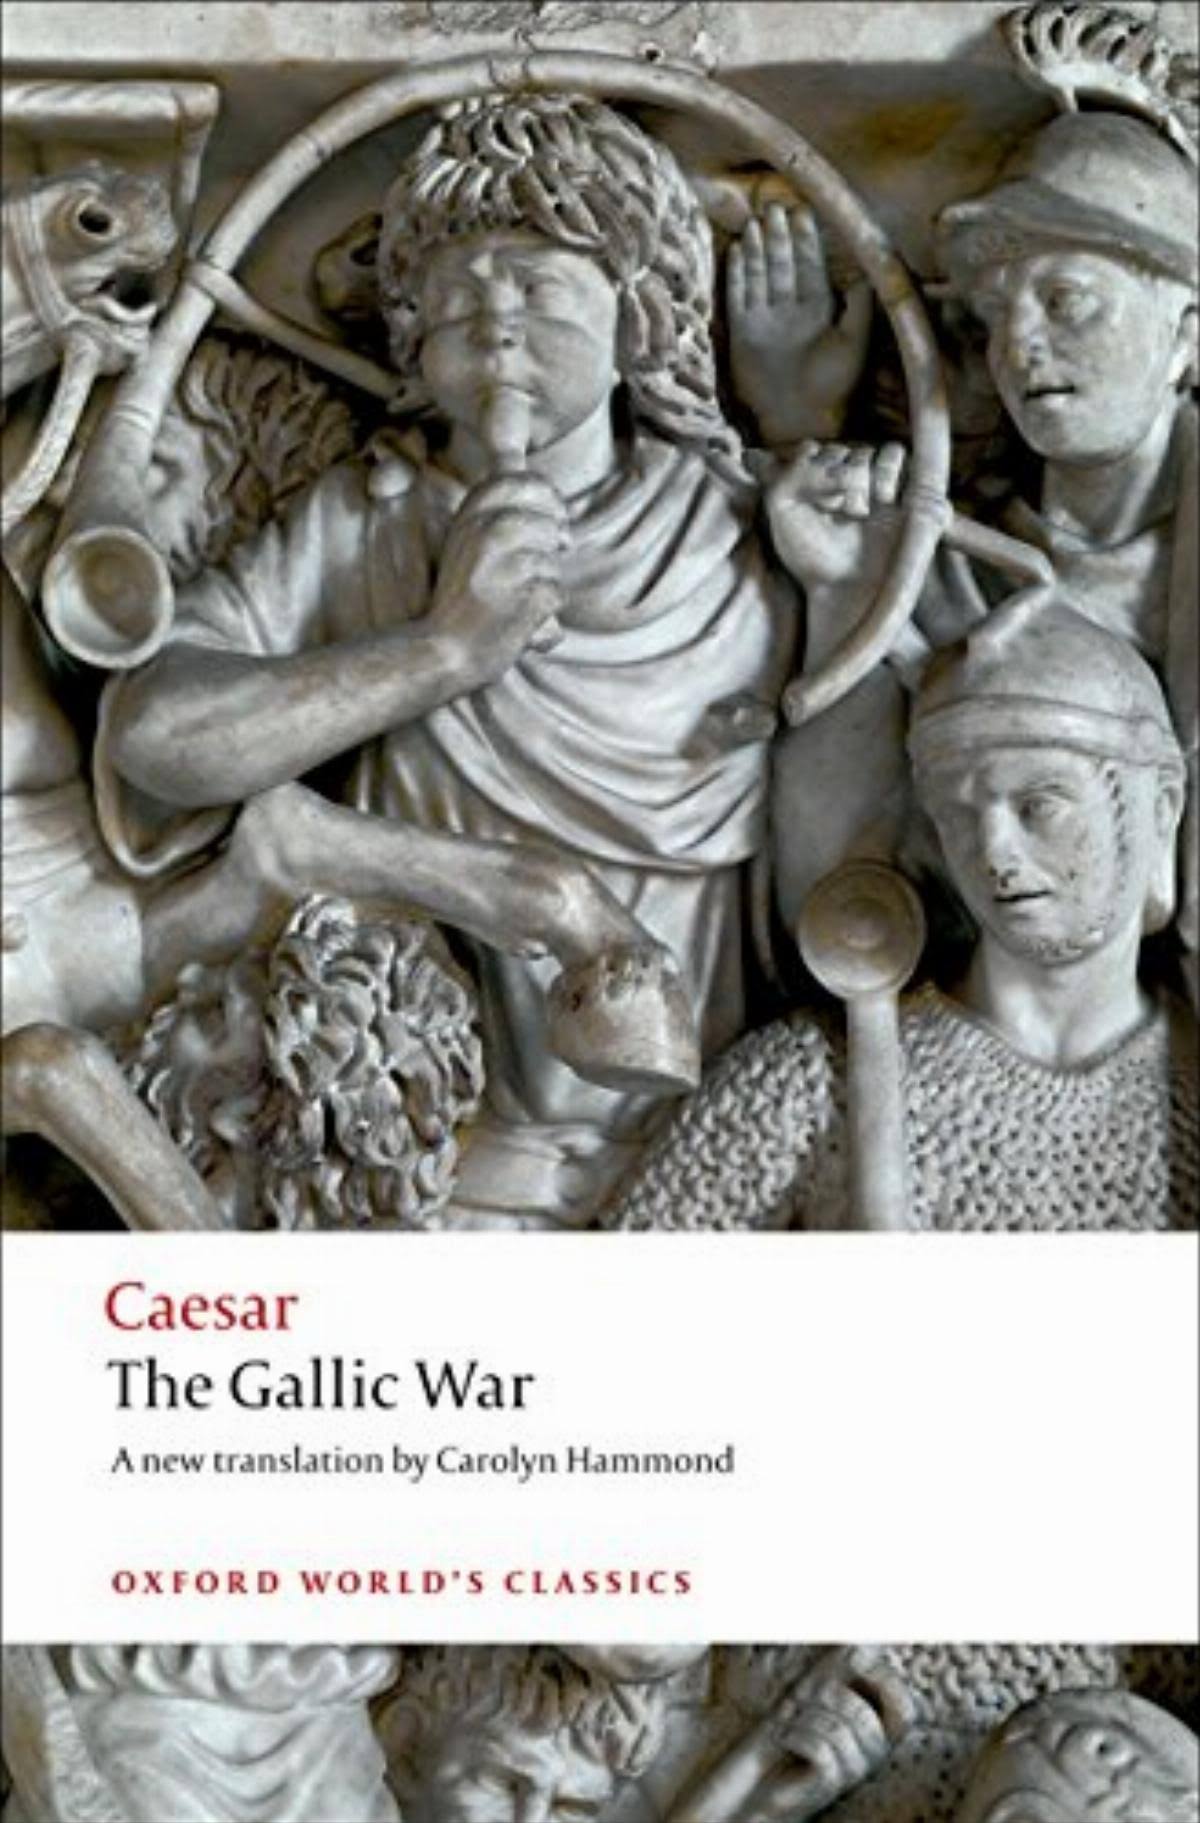 Seven Commentaries on the Gallic War